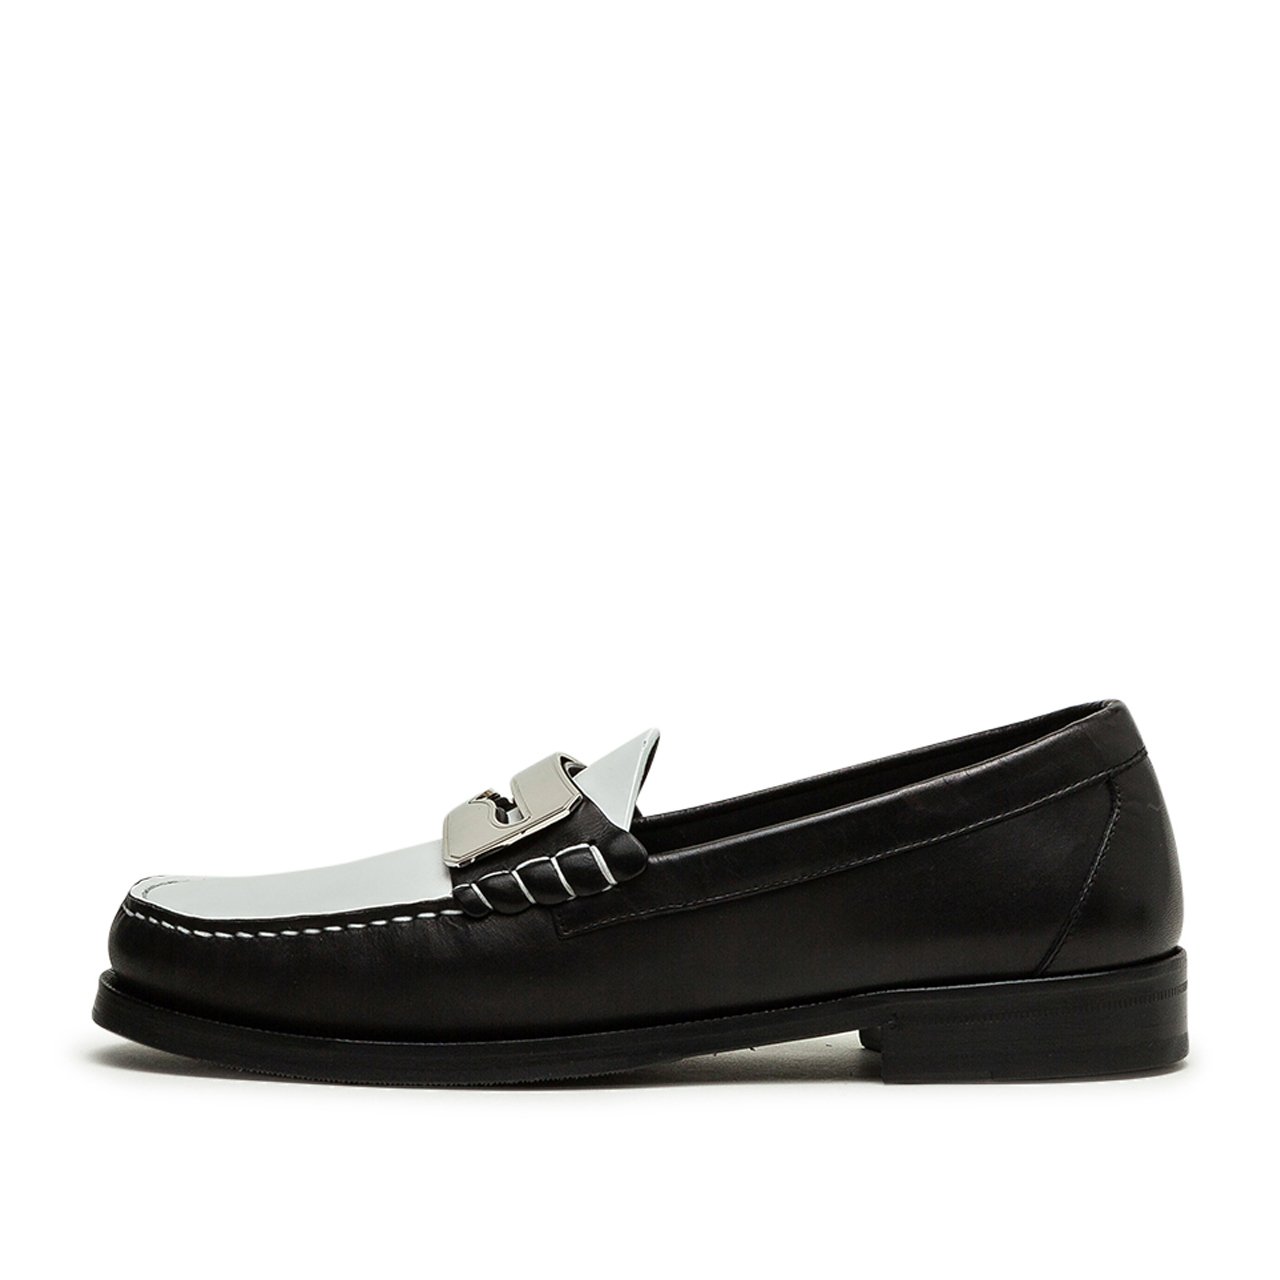 buscemi town loafer (black / white) - 120smbenpn99of - a.plus - Image - 3